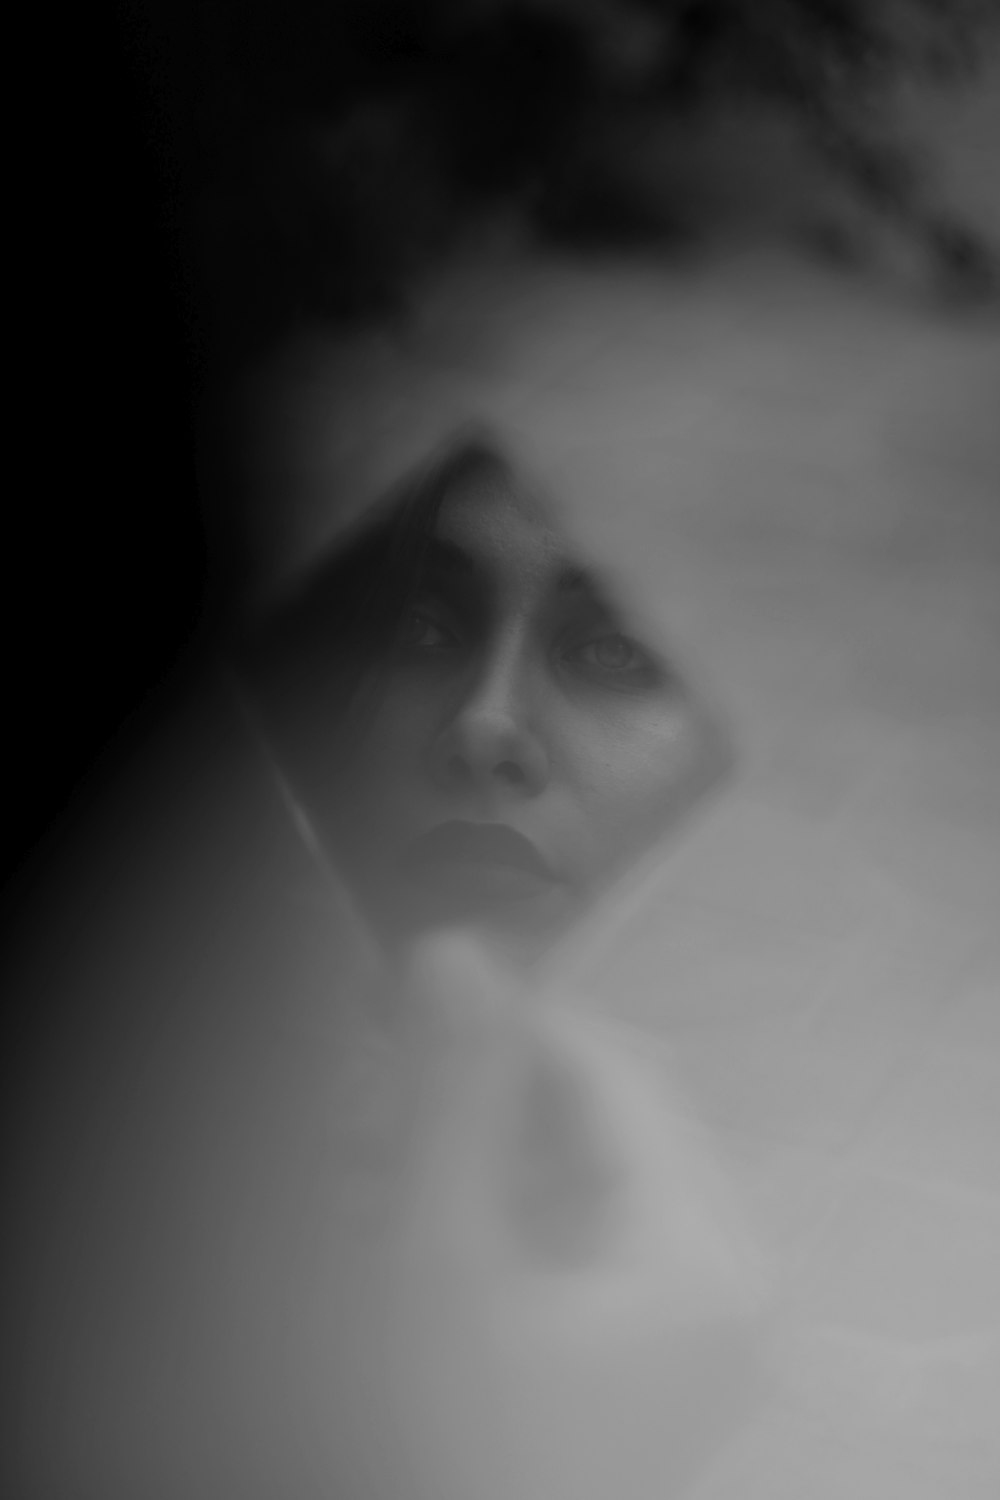 a blurry photo of a woman's face in a mirror